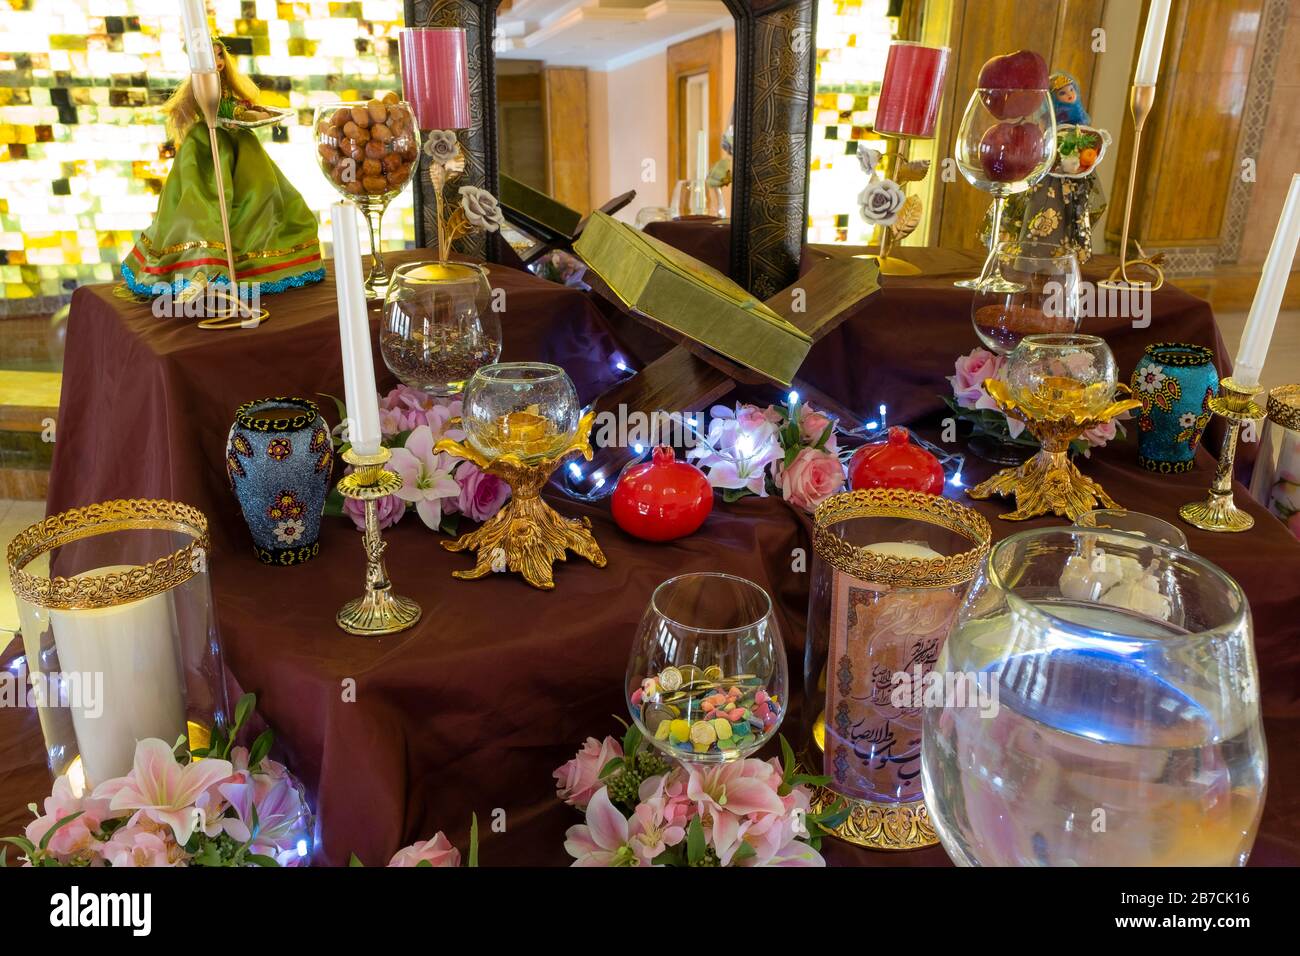 Haft sin table, the main symbol of Persian new year Nowruz that every Iranian arrange one in their home as a traditional ritual. Stock Photo